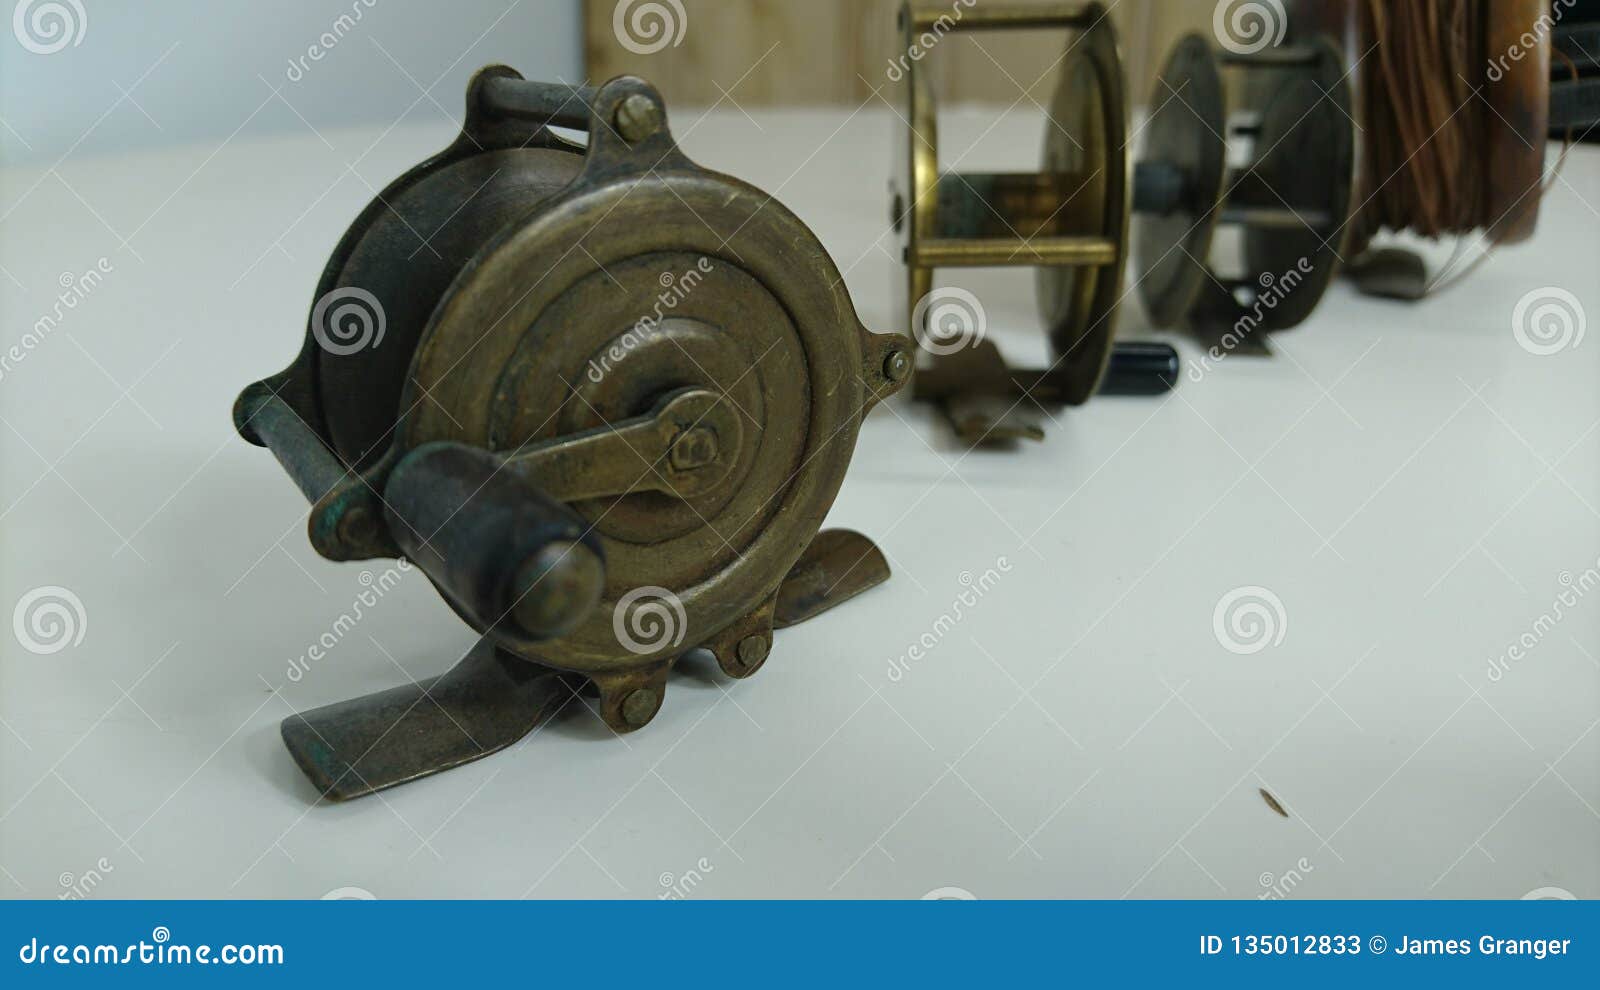 Some Antique Brass Fishing Reels Stock Image - Image of fishing, reals:  135012833